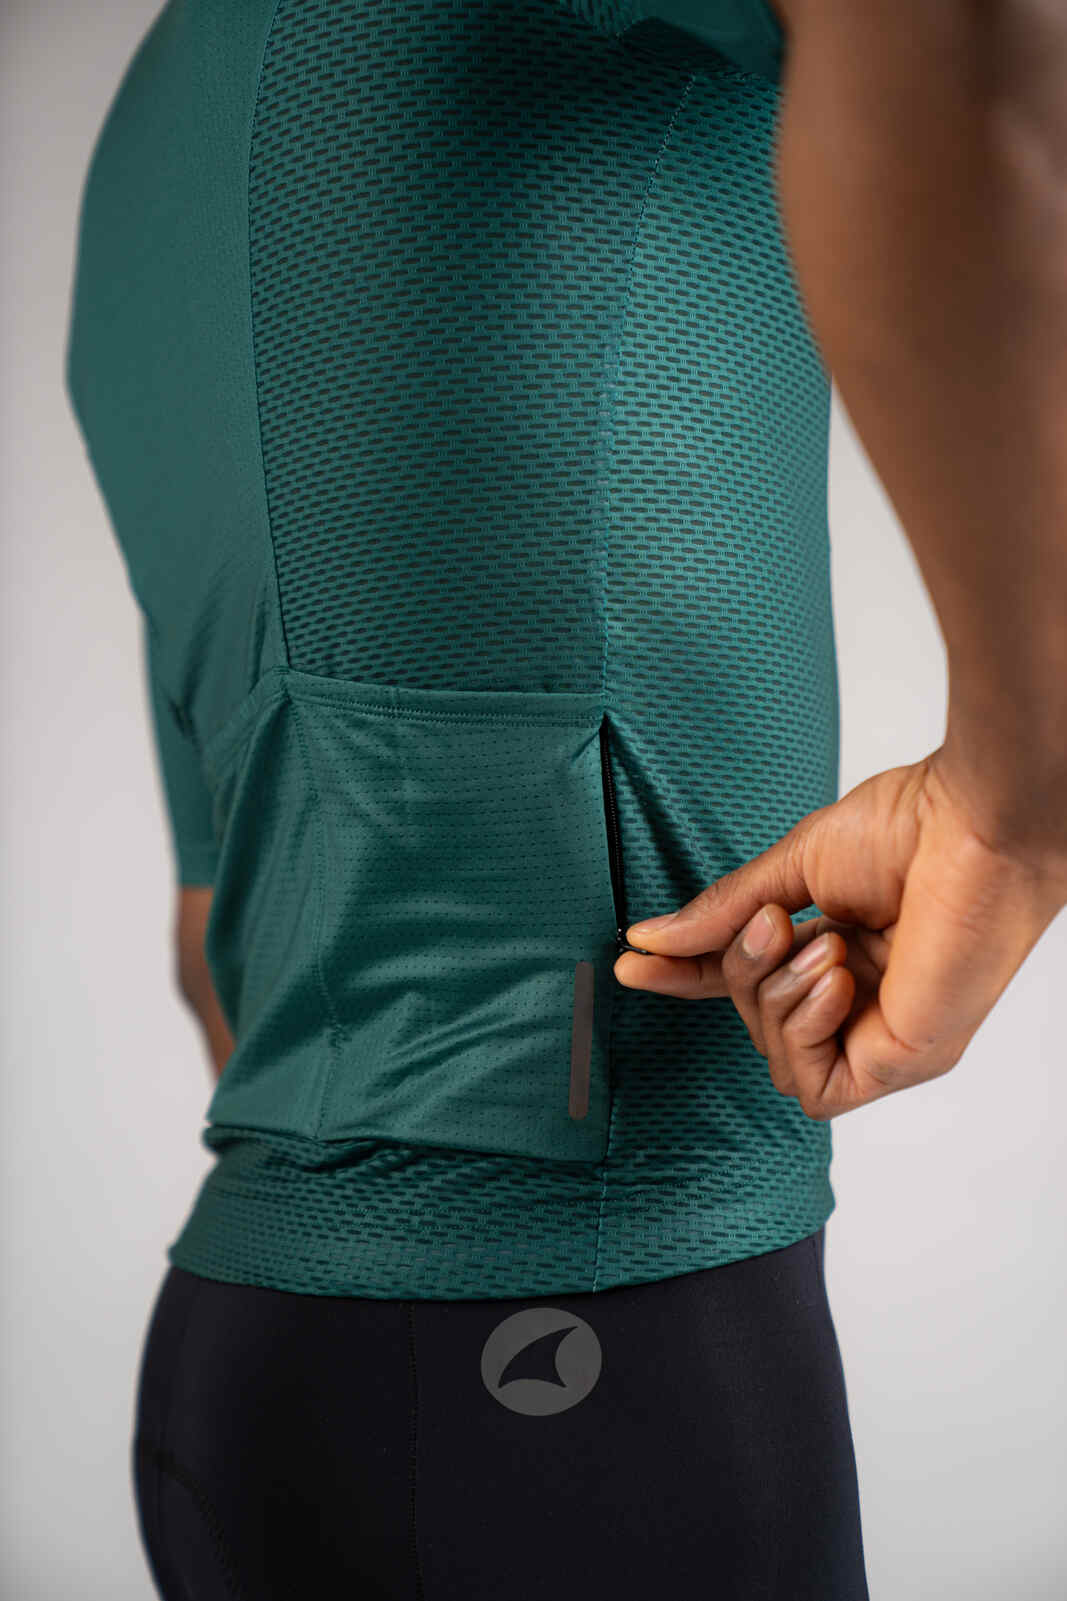 Men's Green Mesh Cycling Jersey - Zippered Valuables Pocket